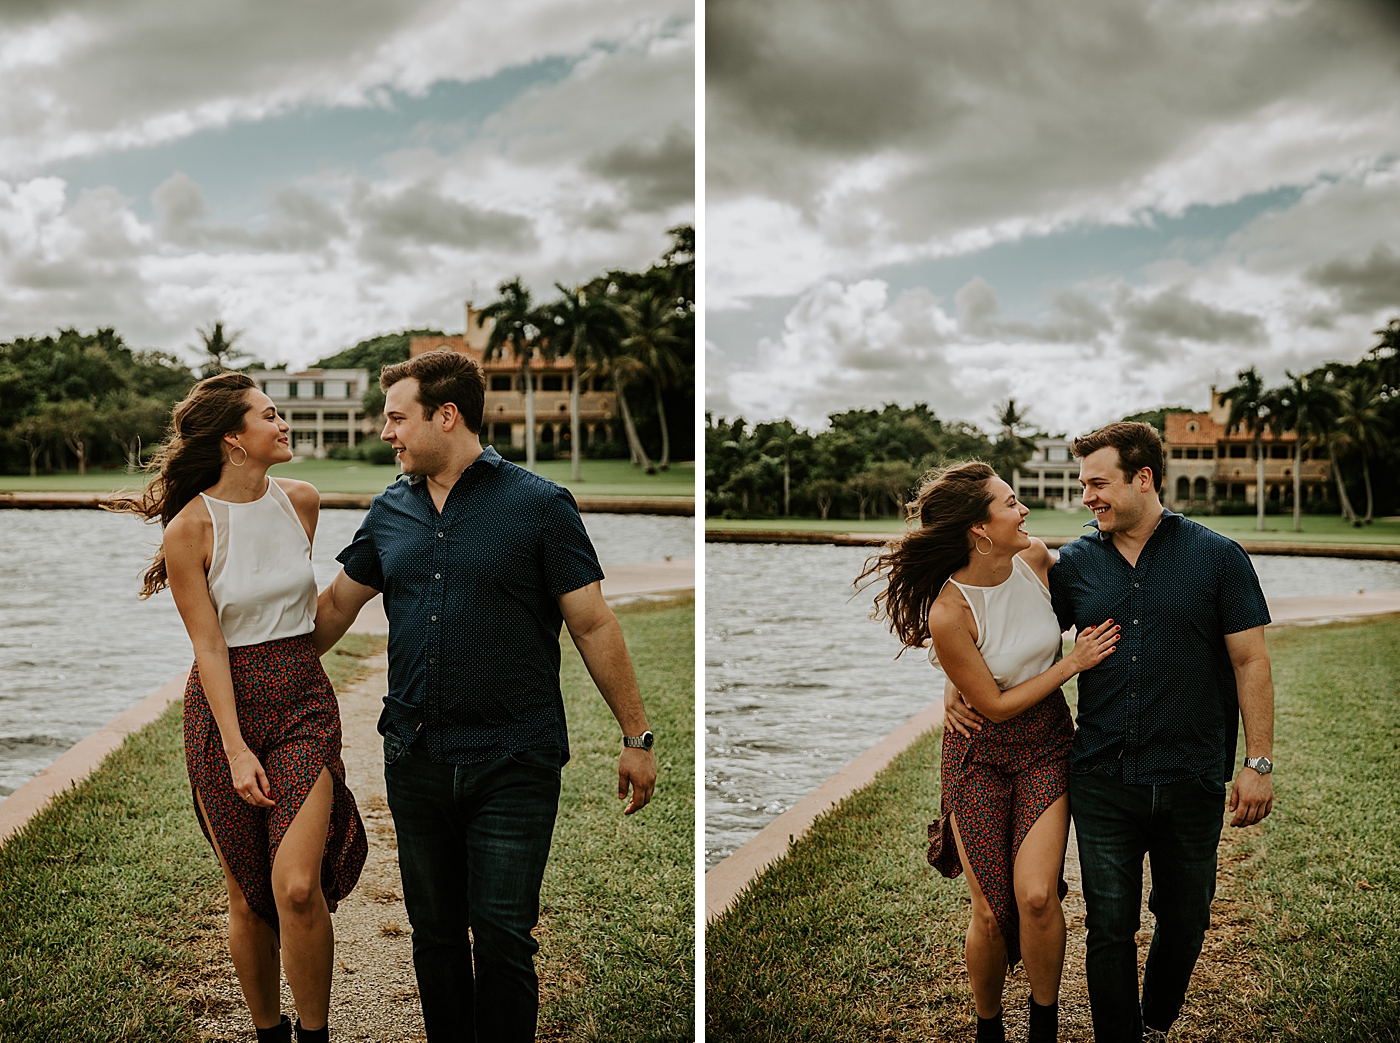 Couple with their arms around each other and walking together by the water Deering Estate Engagement Photography captured by Maggie Alvarez Photography